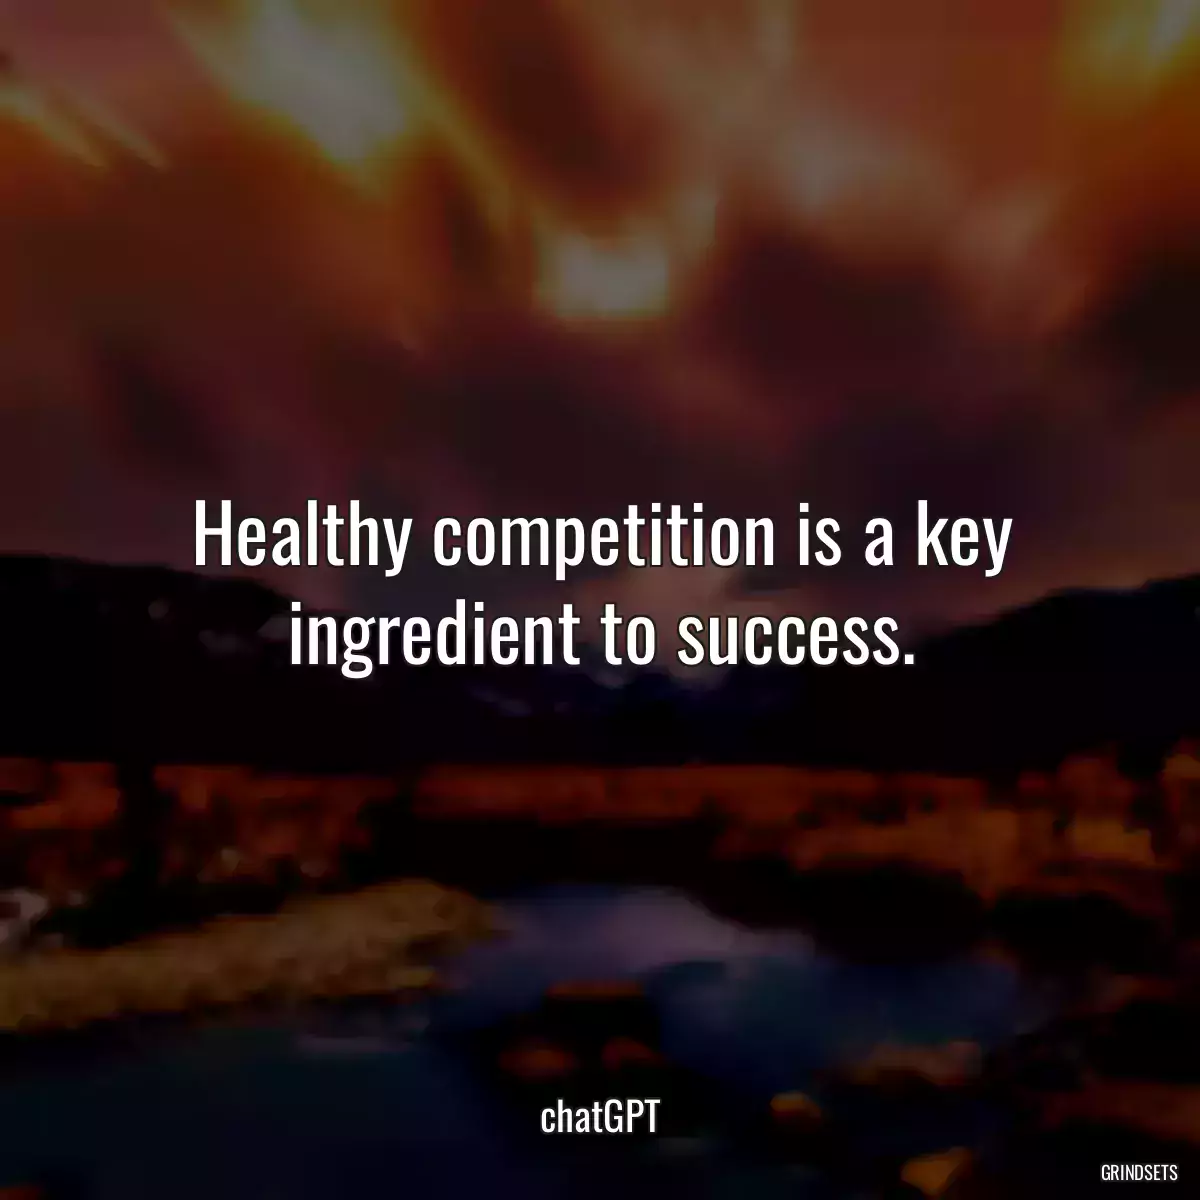 Healthy competition is a key ingredient to success.